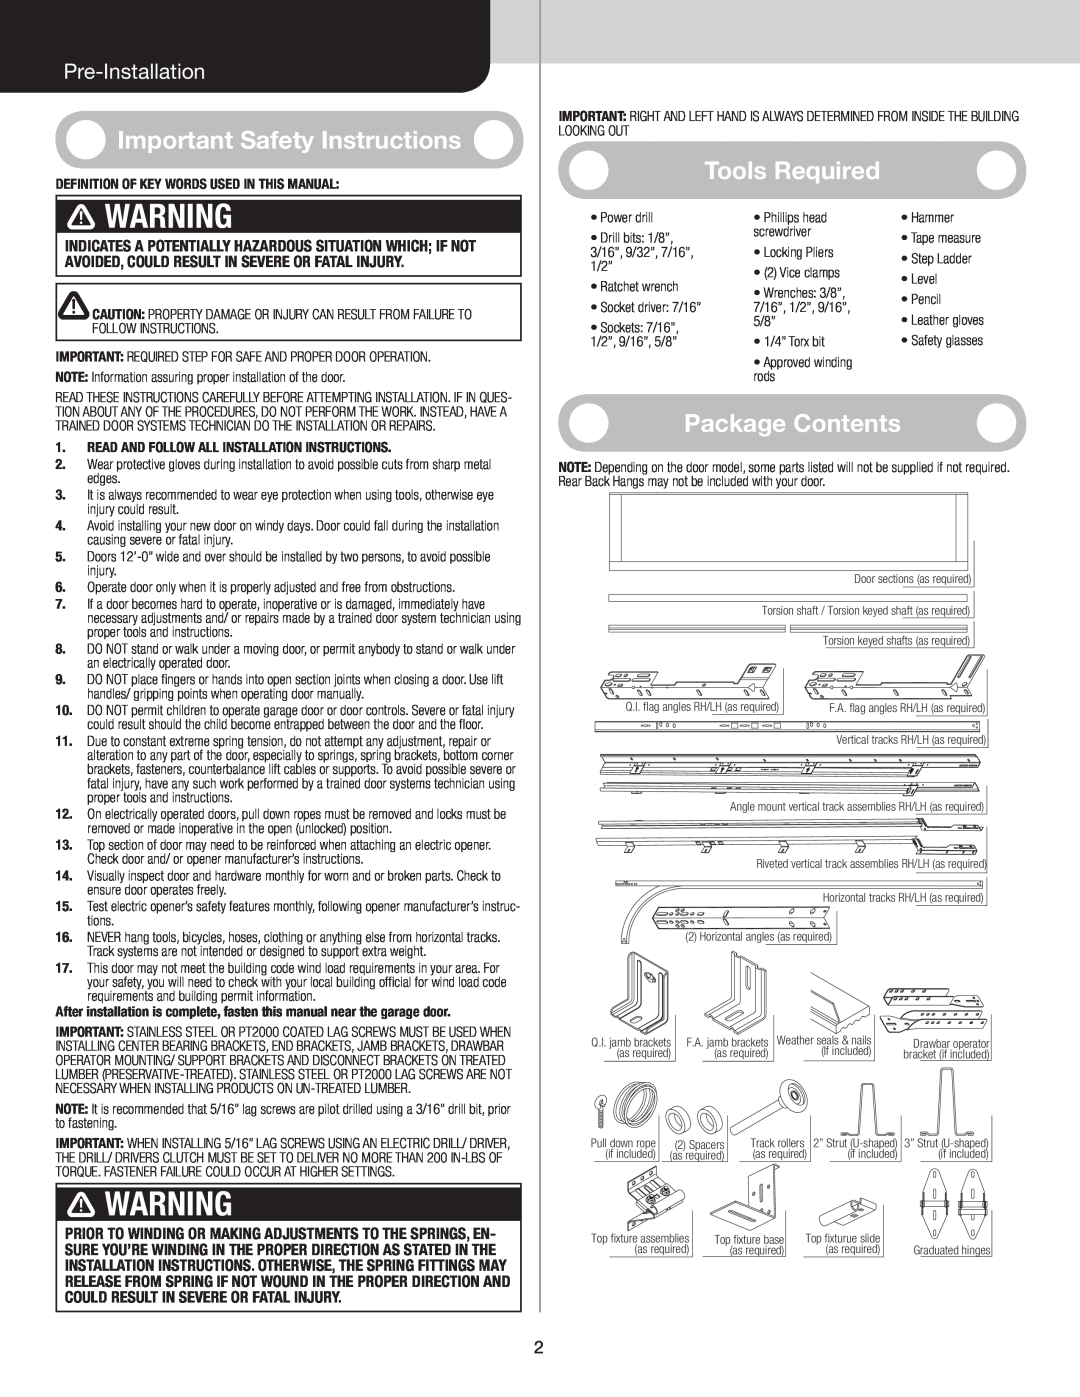 Wayne-Dalton 8300/8500 WarningARNING, Important Safety Instructions, Tools Required, Package Contents, Pre-Installation 